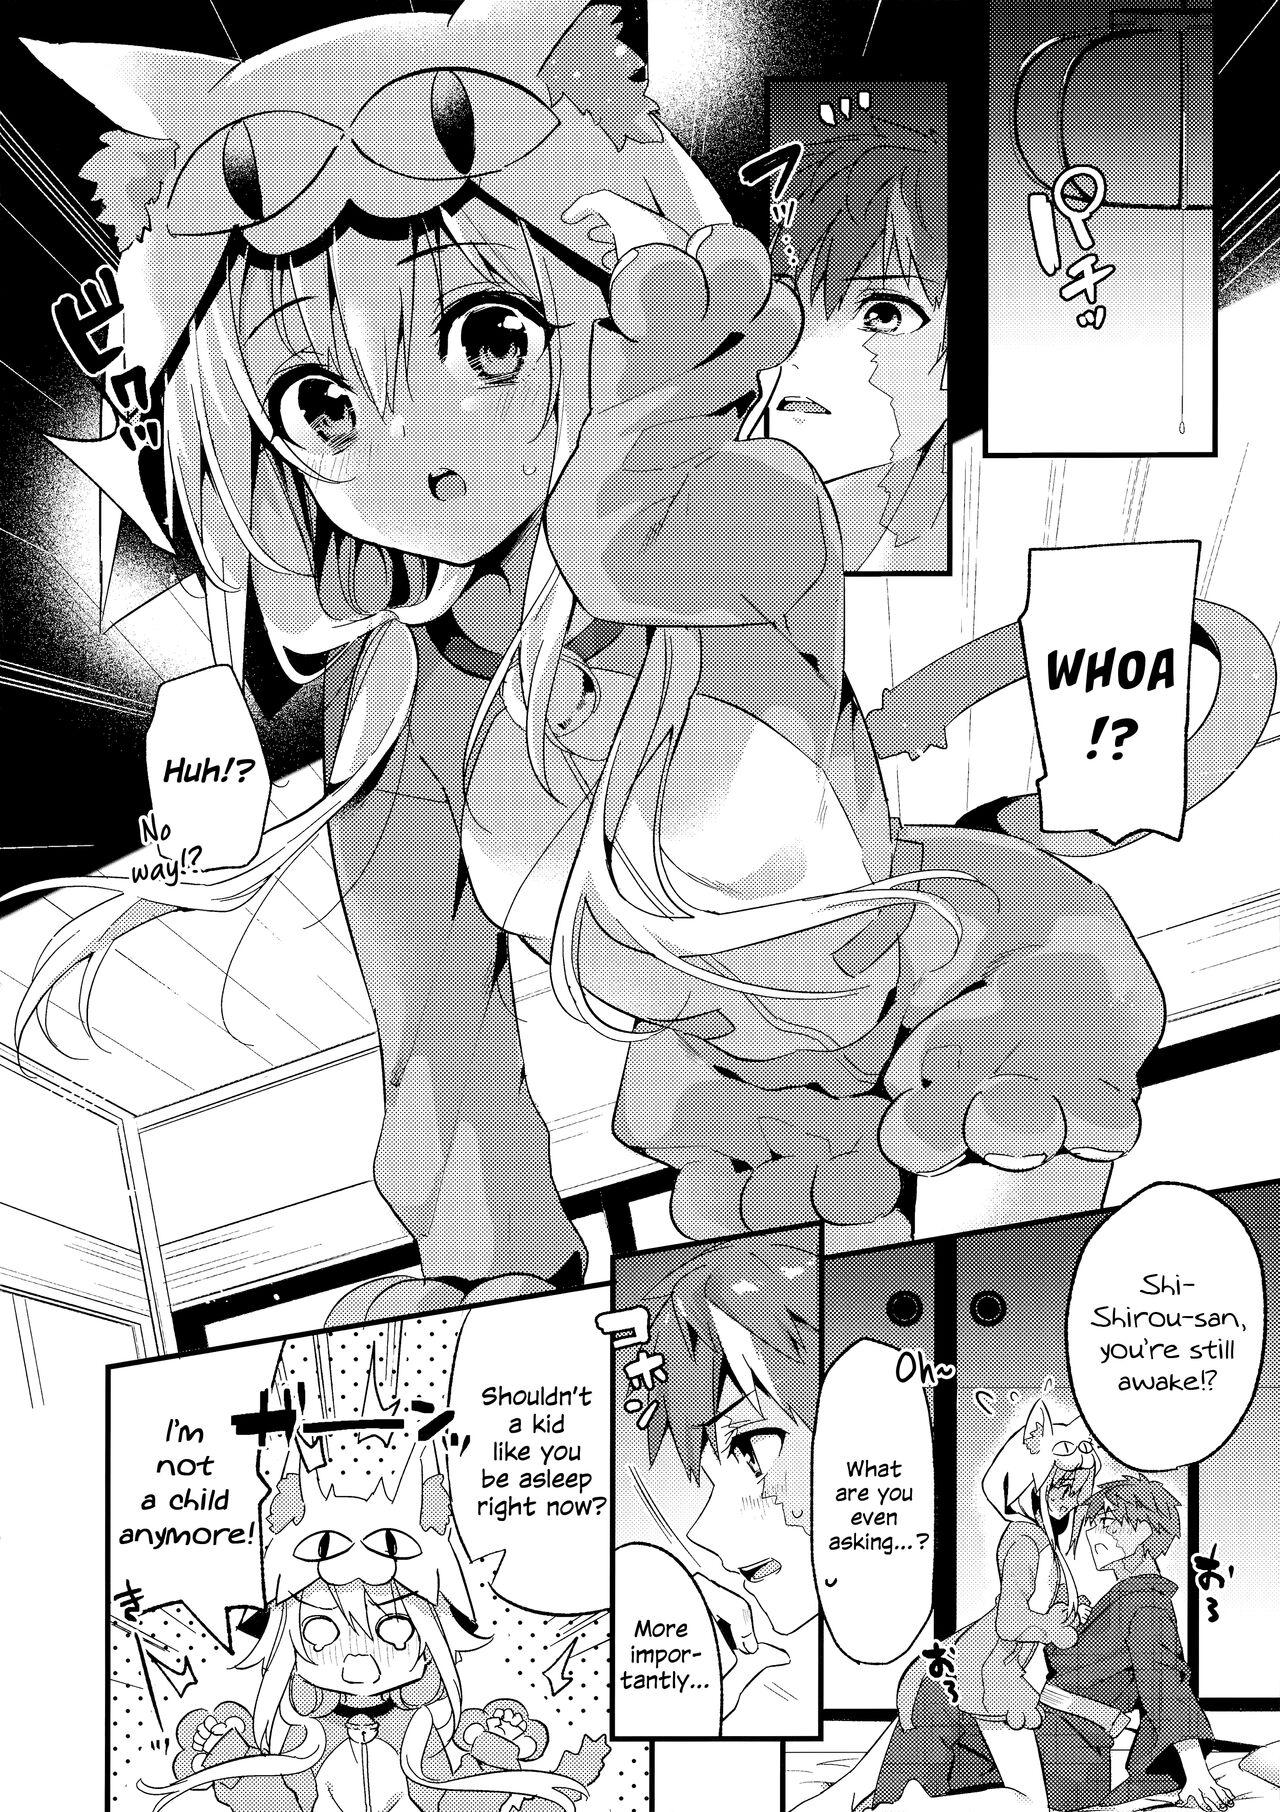 Home Onii-chan, Illya to Shiyo? - Fate kaleid liner prisma illya Perra - Page 5